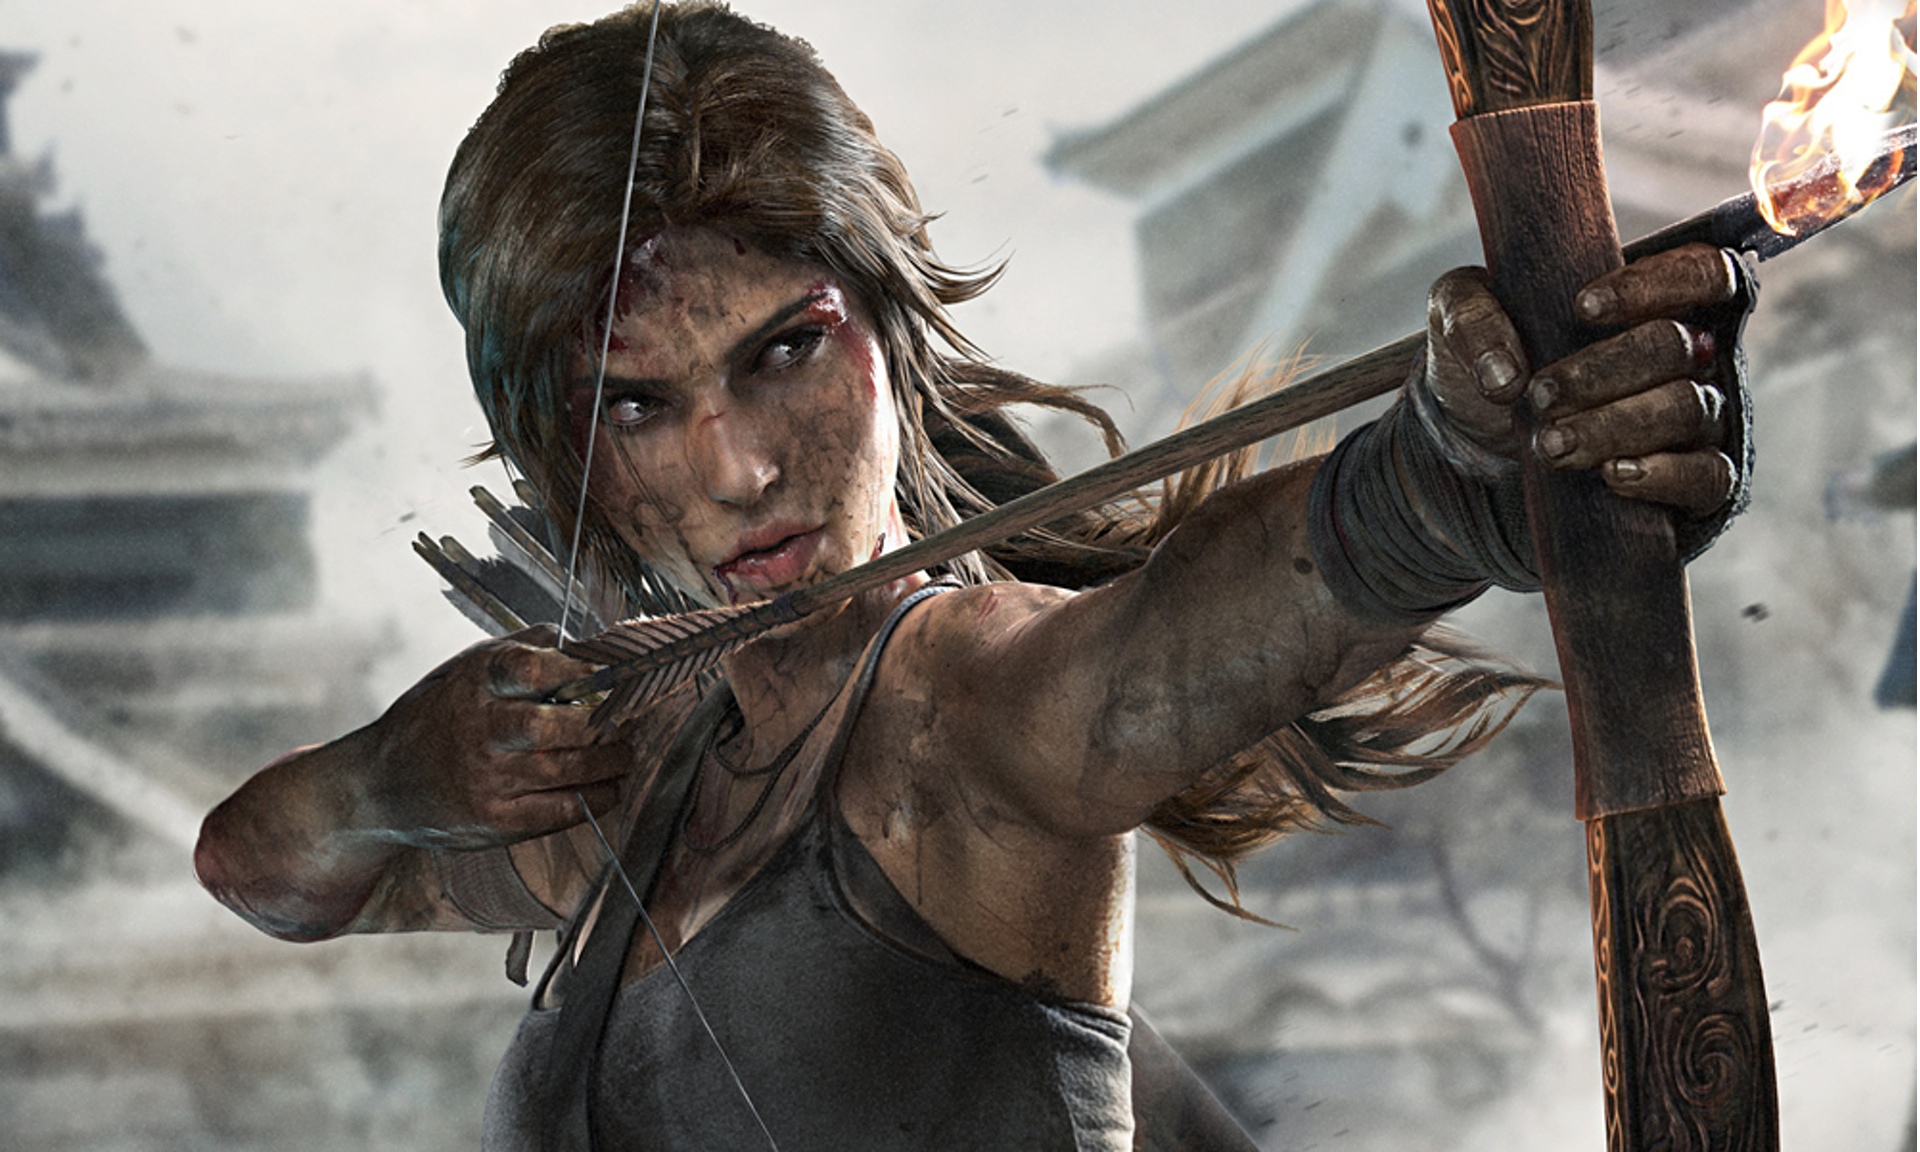 Lara Croft from the 2013 reboot is more human in both her motivations and appearance